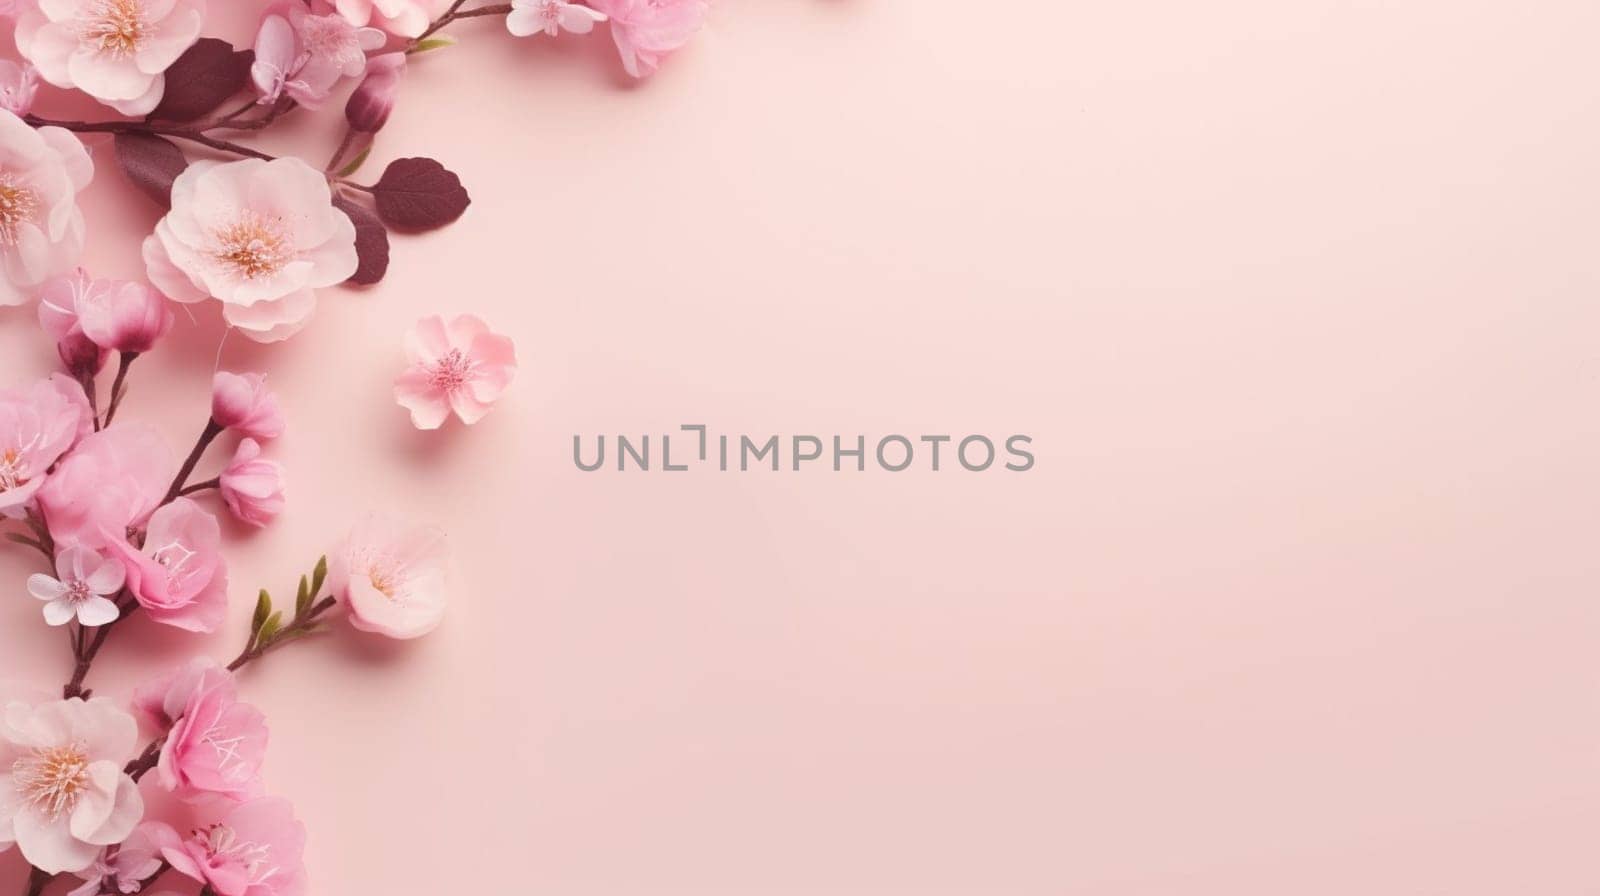 Elegant cherry blossoms arrayed across the top left side create a tranquil scene on a soft pink background, offering a serene, springtime ambiance by kizuneko